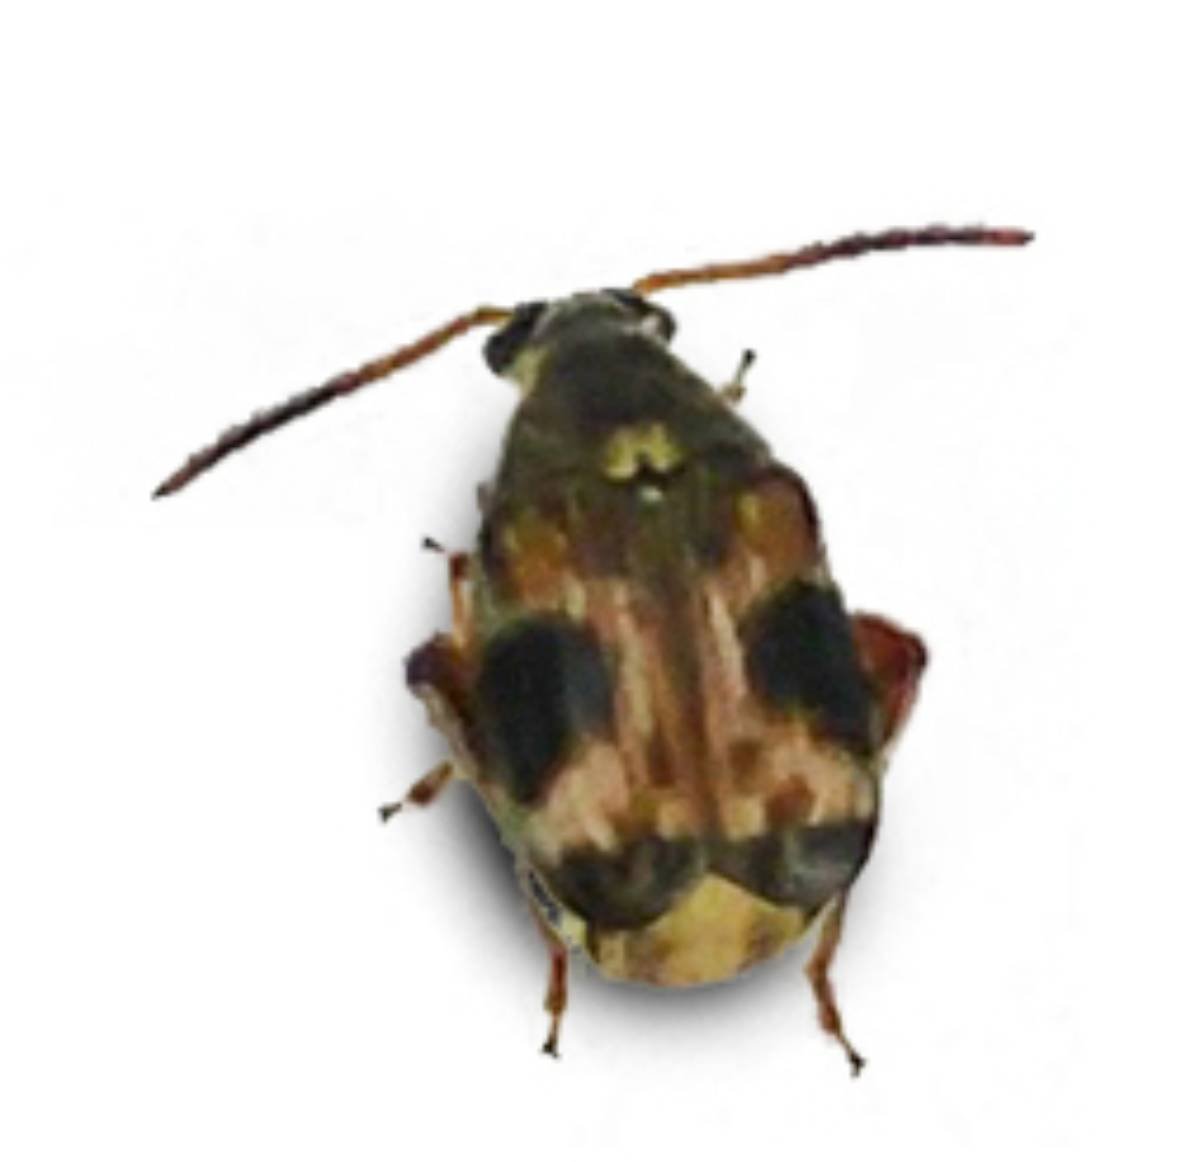 Feeder insects: Bean Beetles